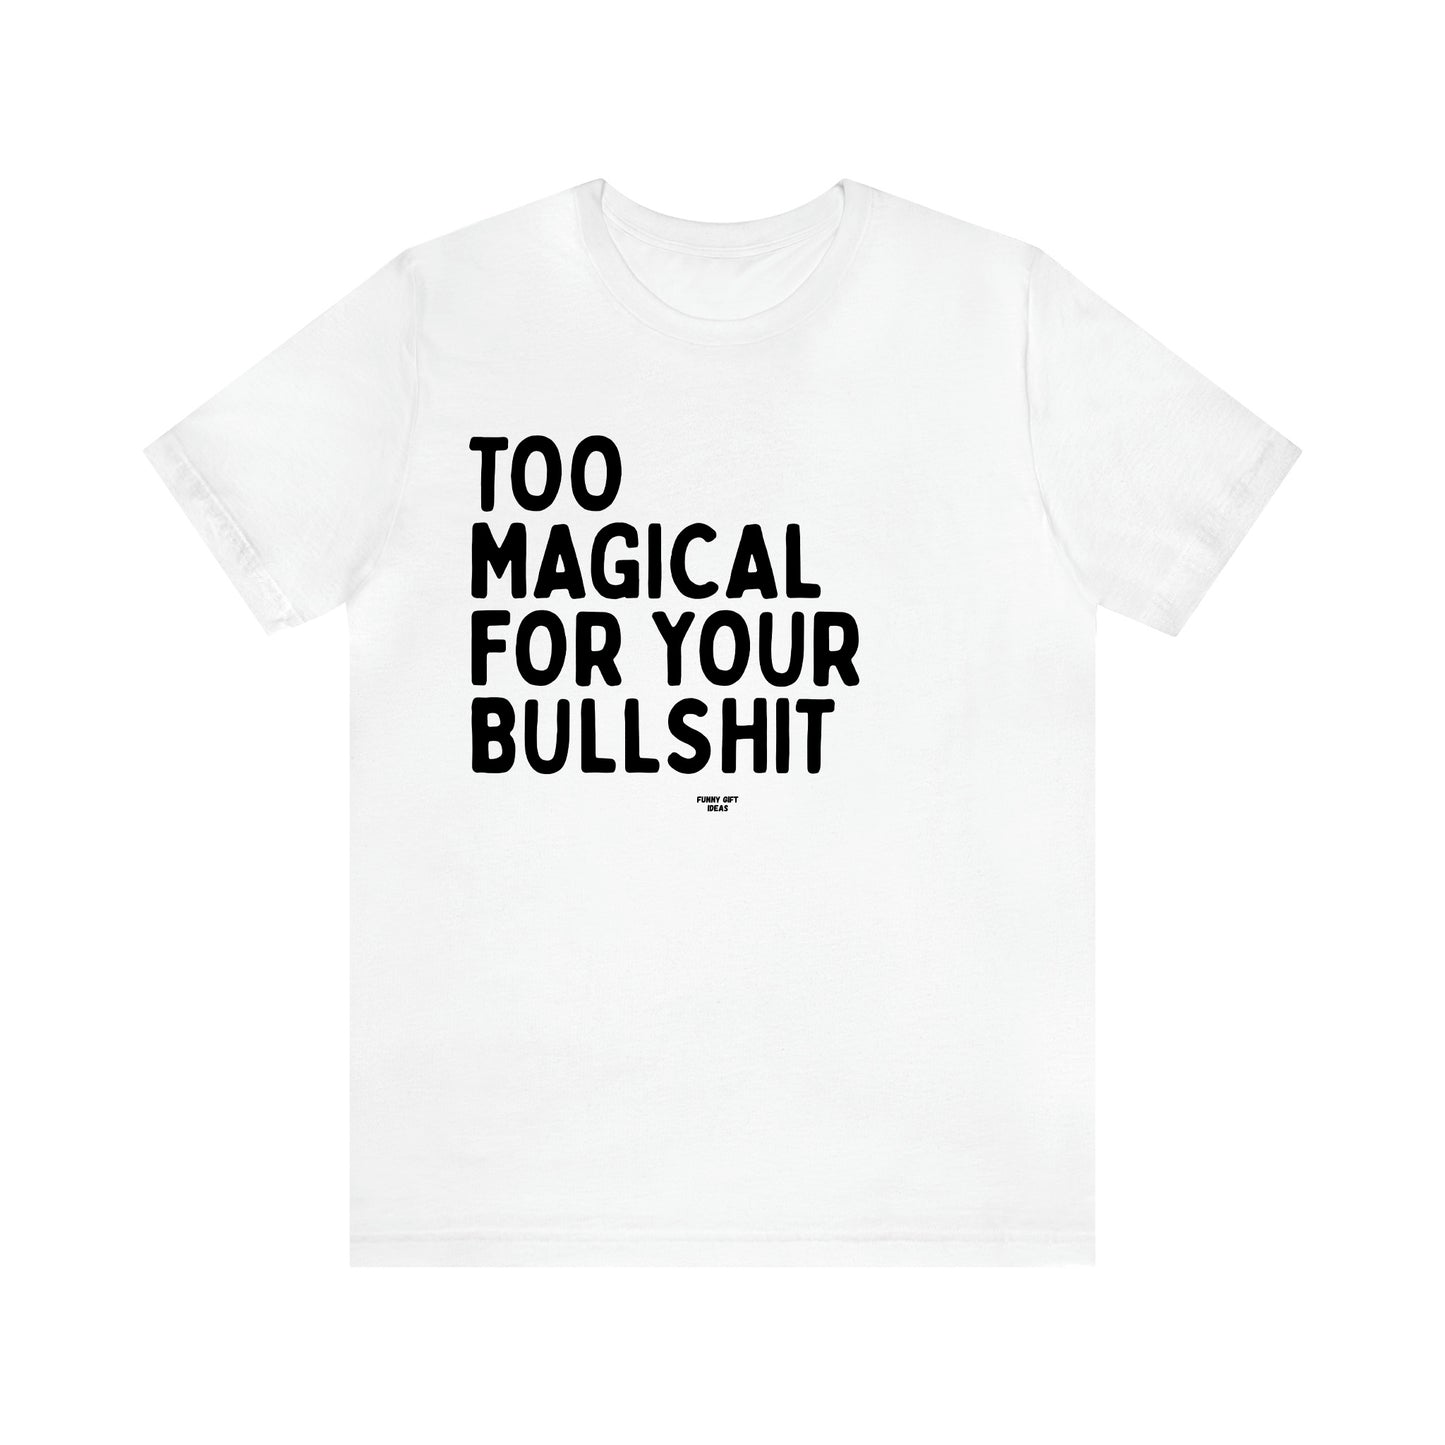 Men's T Shirts Too Magical for Your Bullshit - Funny Gift Ideas